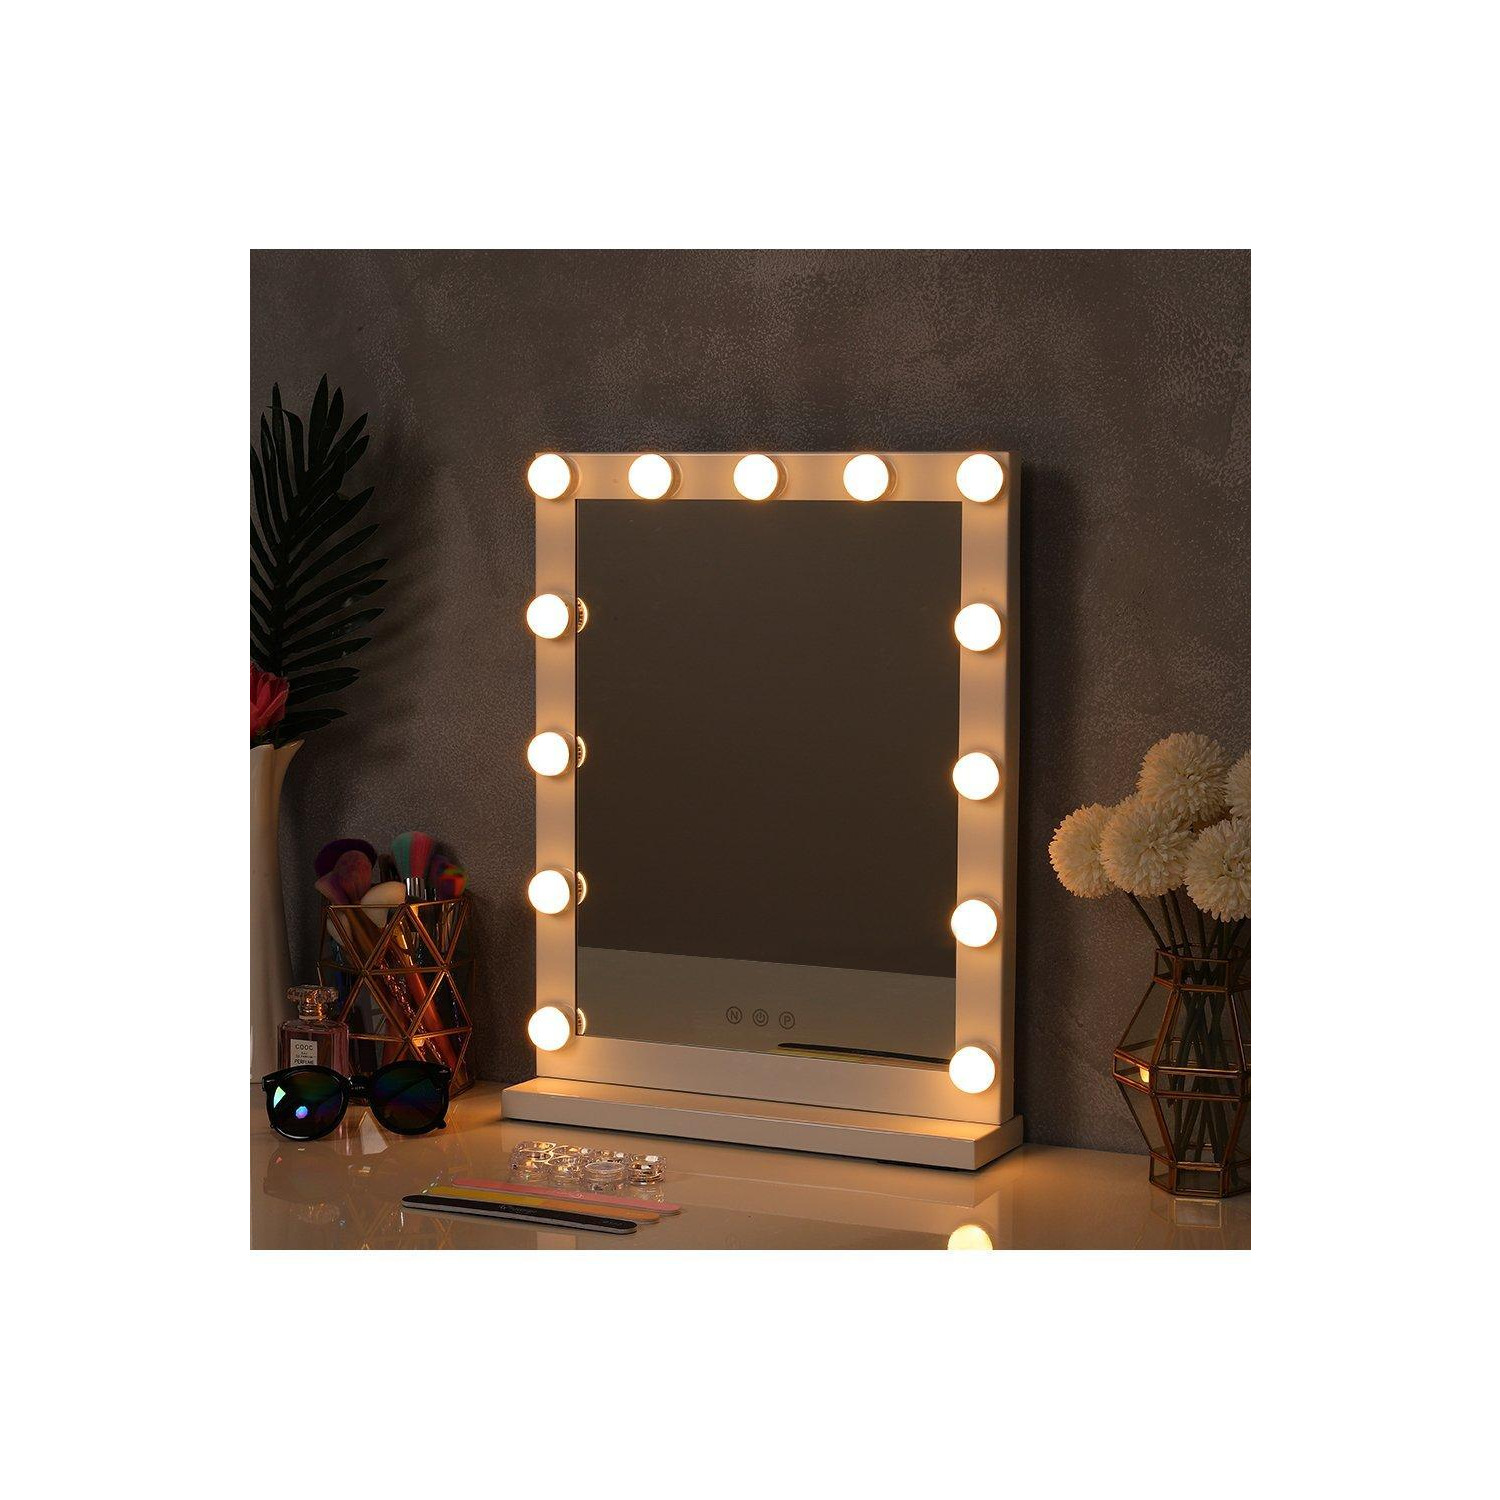 Touch Control Design 3 Color Lighted  Hollywood Vanity Makeup Mirror - image 1